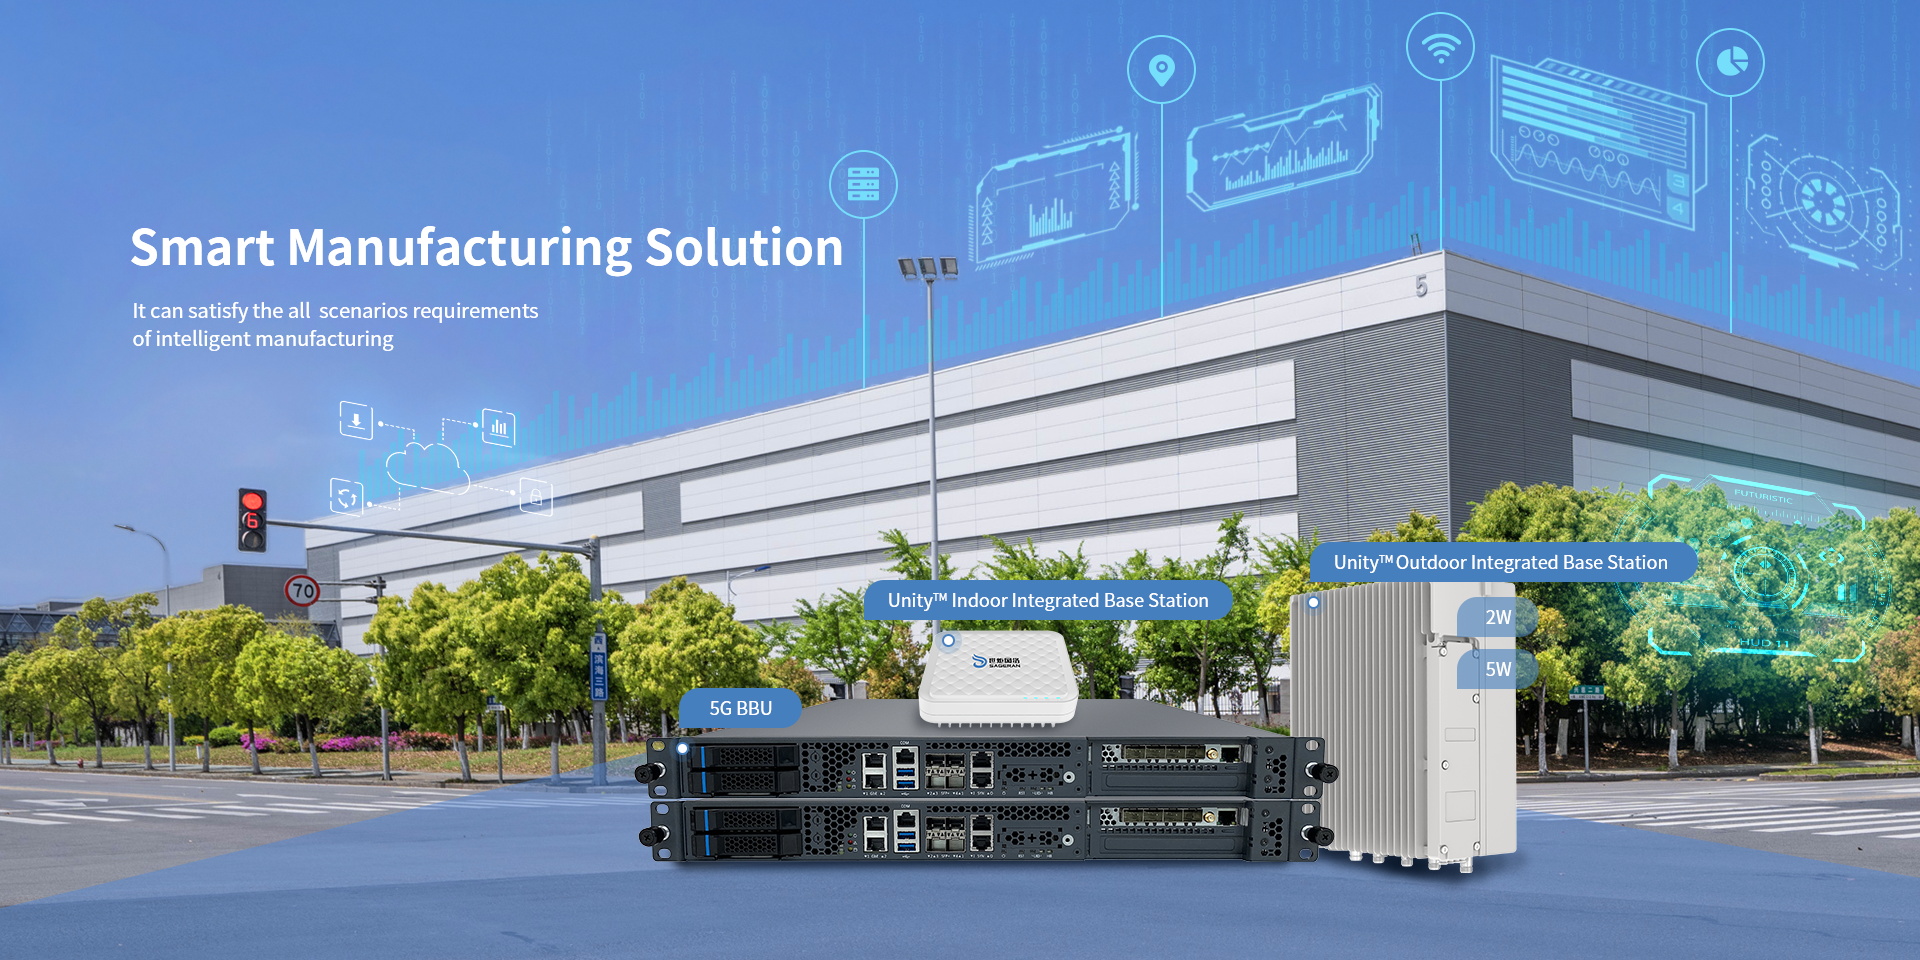 Smart Manufacturing Solution